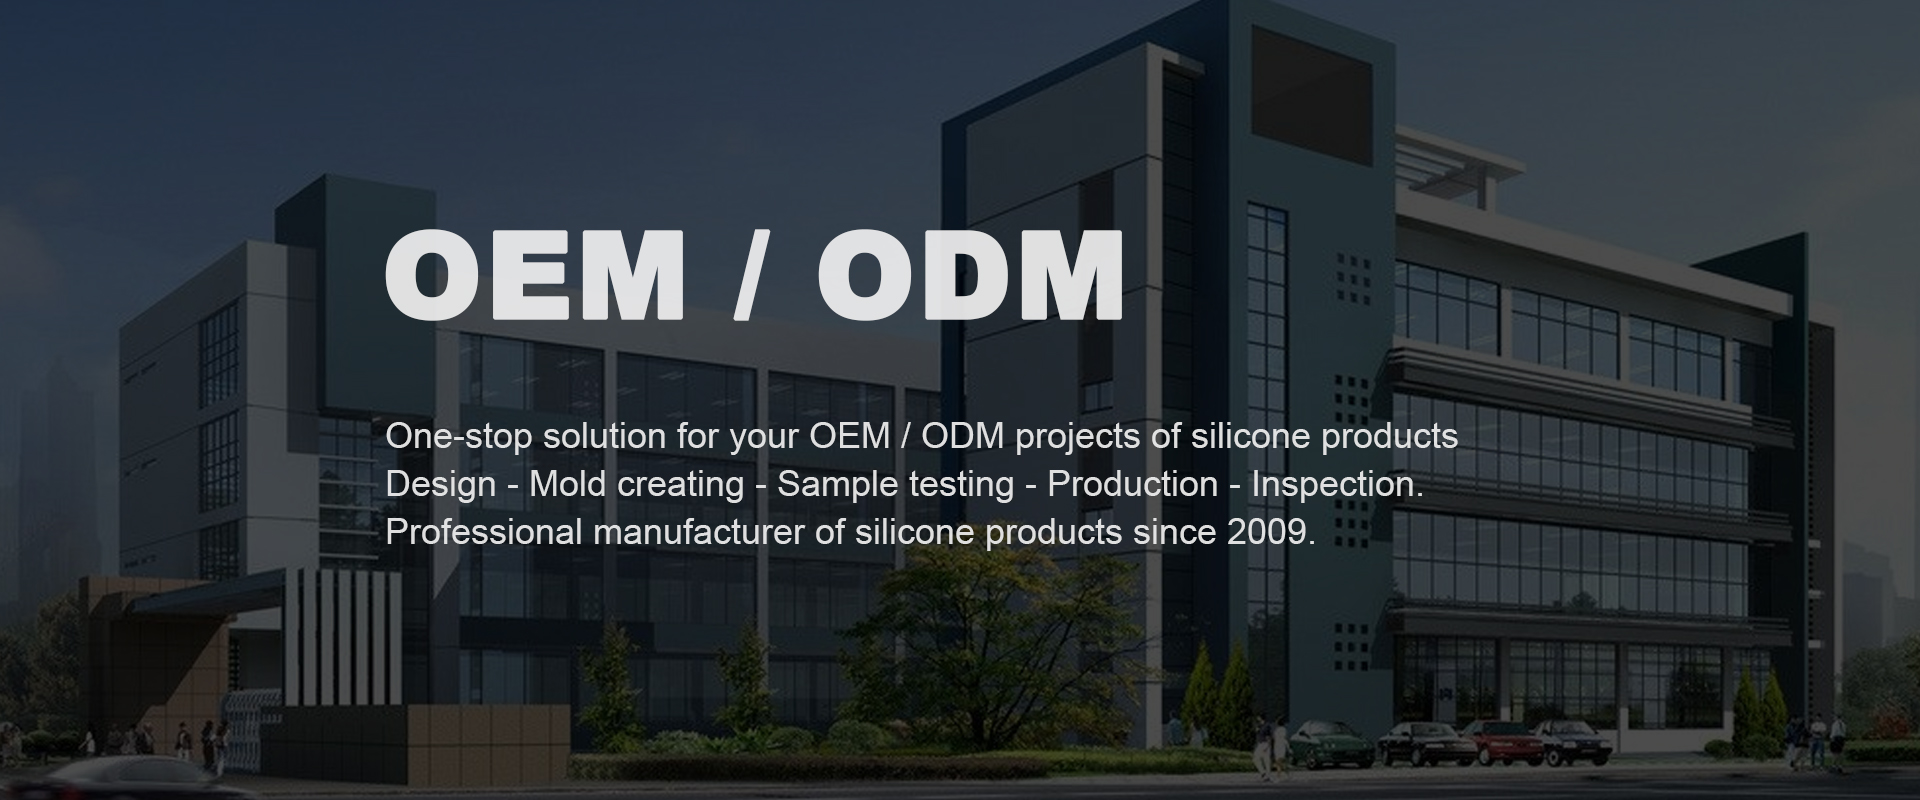 OEM/ODM Silicone Products